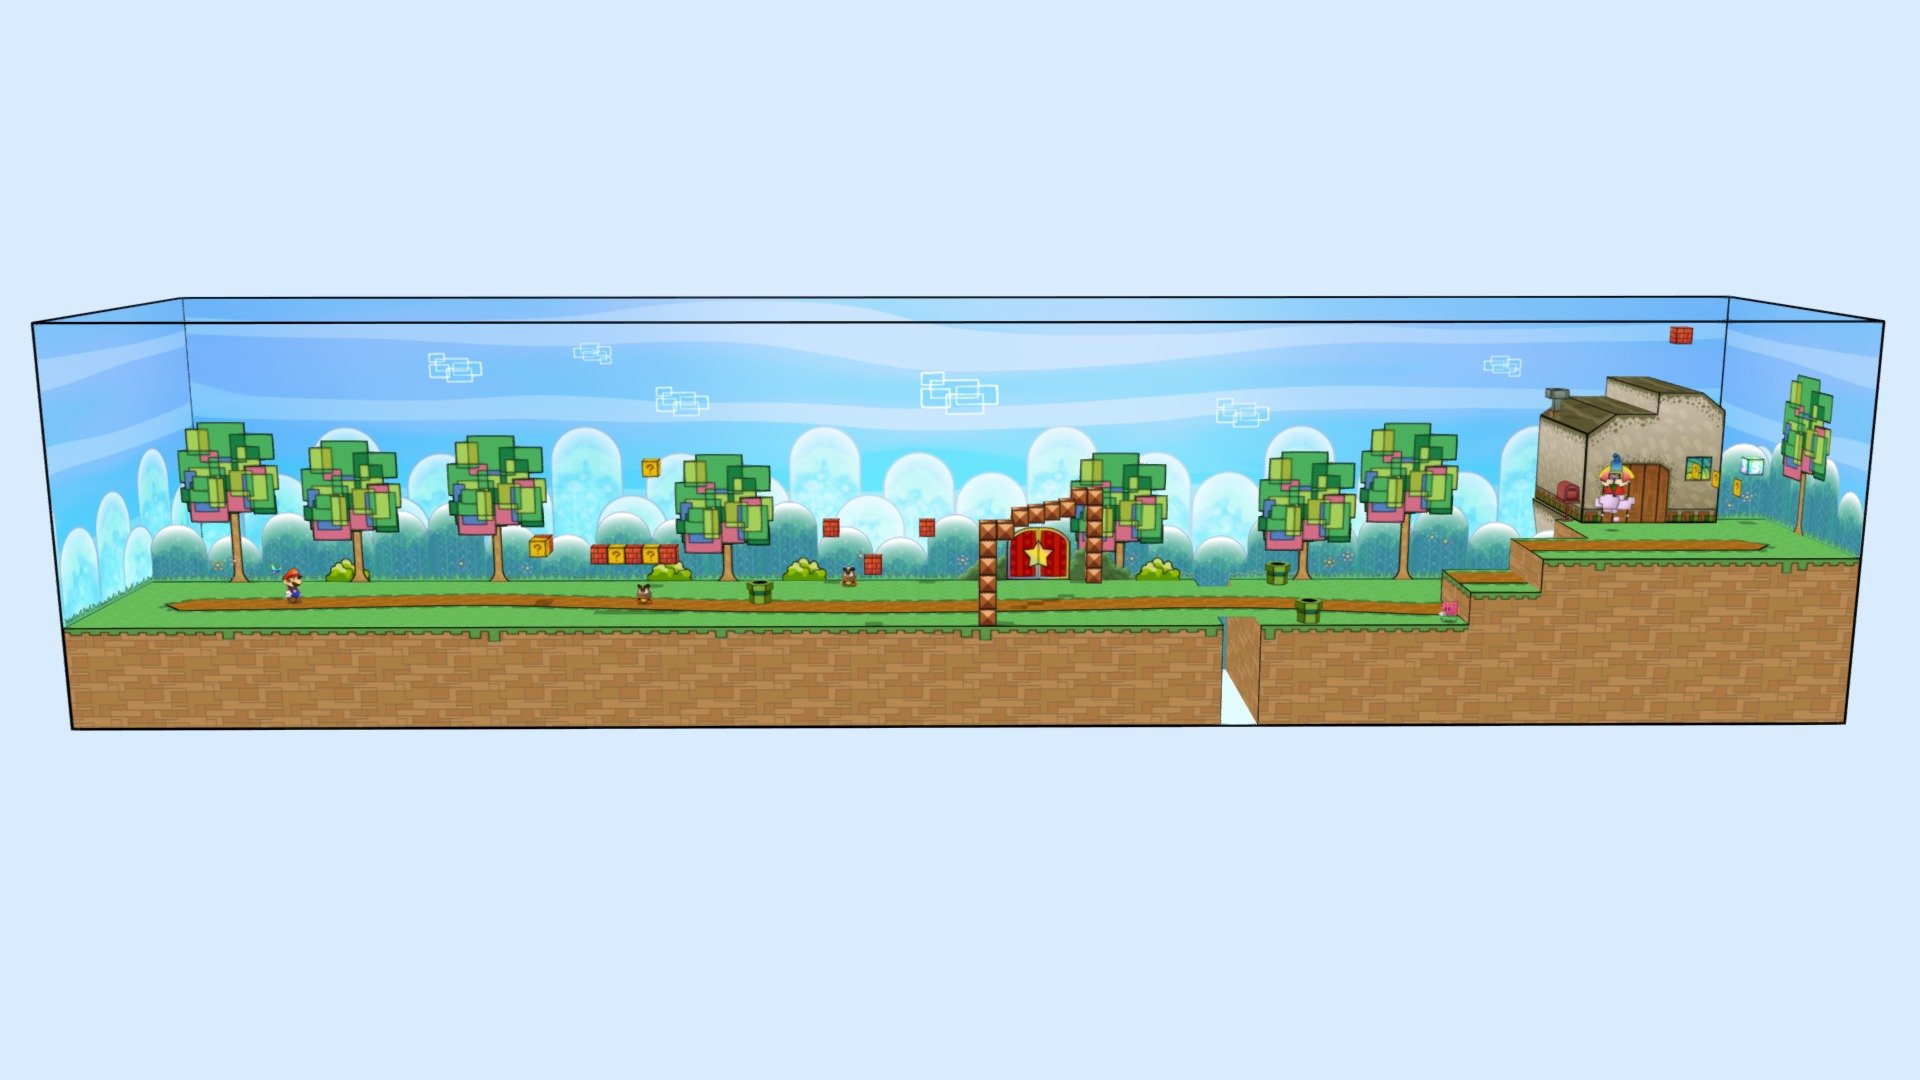 A digital diorama based on the first stage of Super Paper Mario 3d model